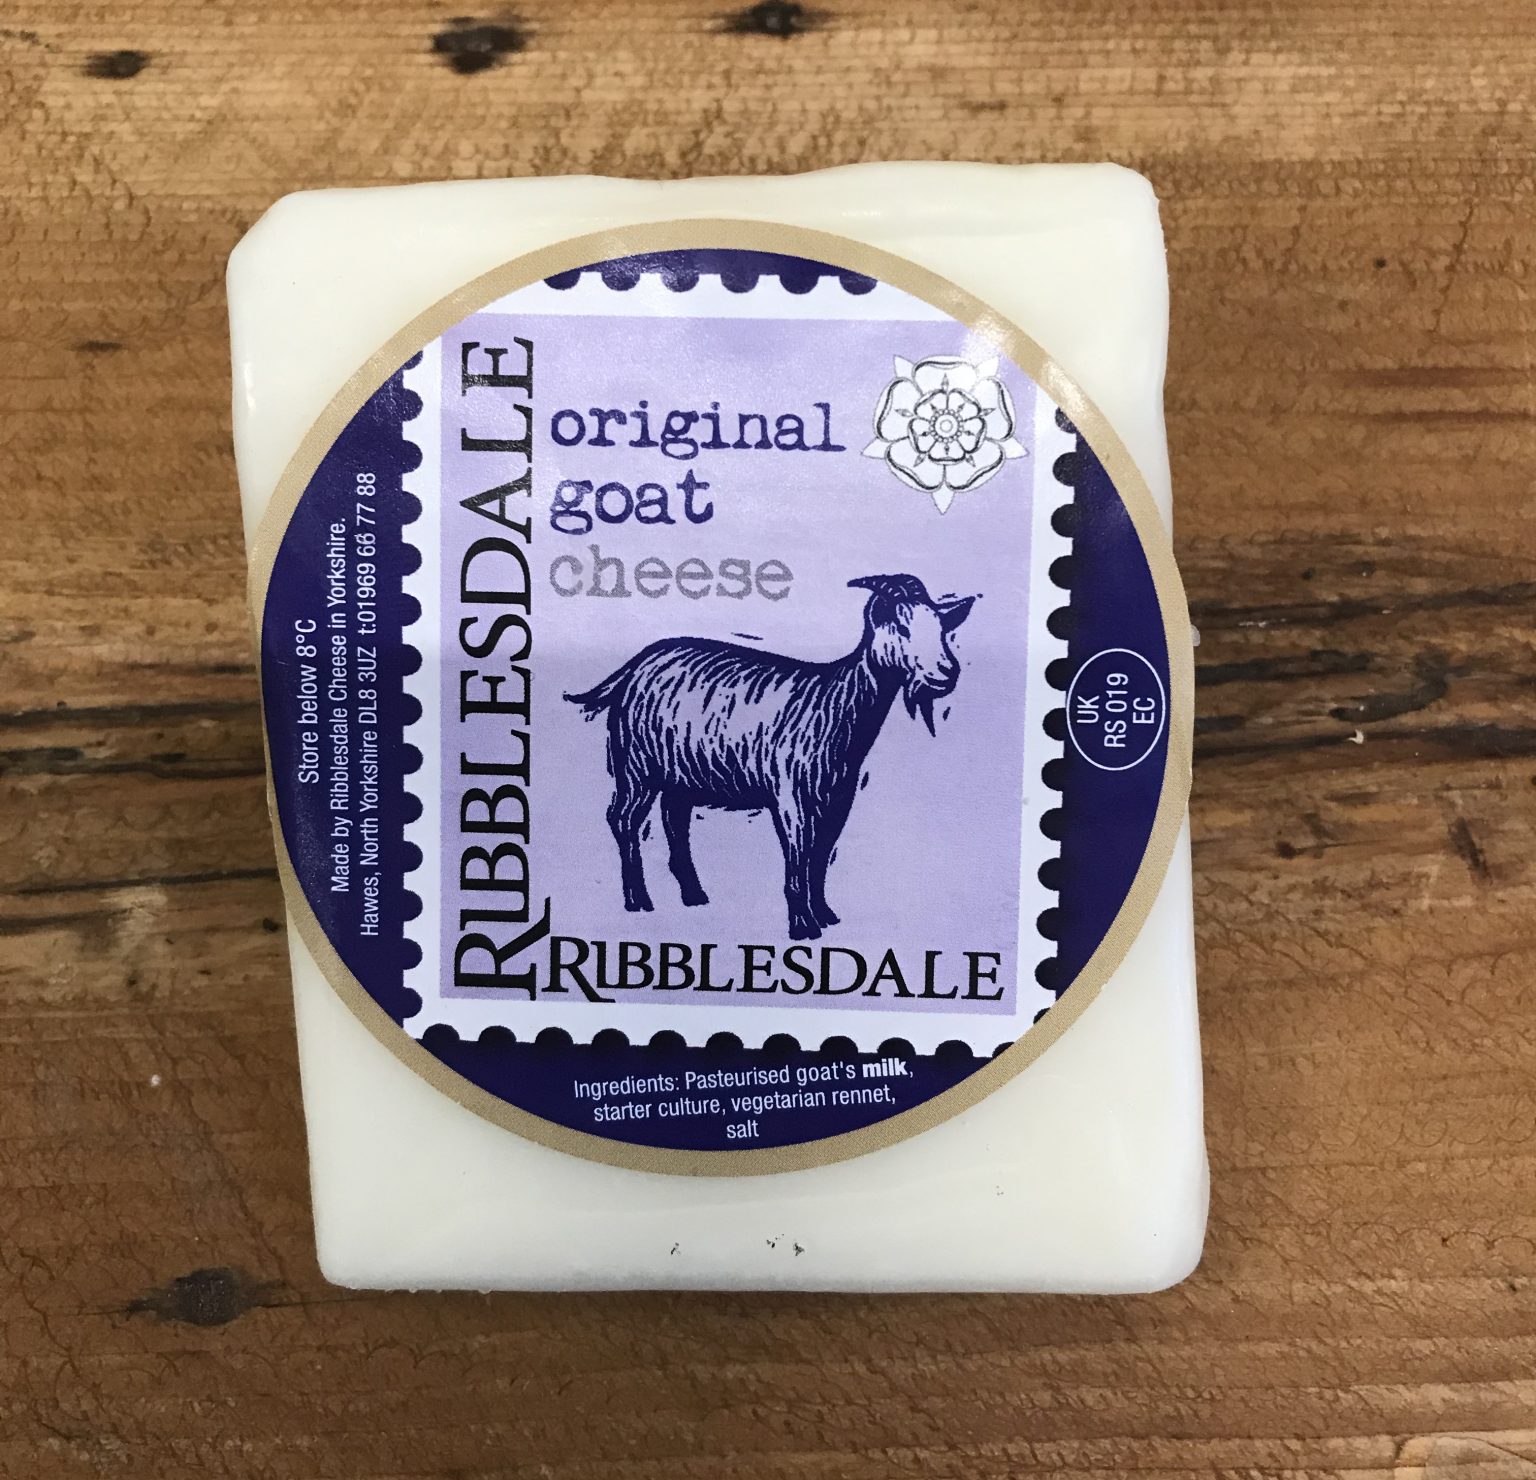 Ribblesdale Original Goat Cheese